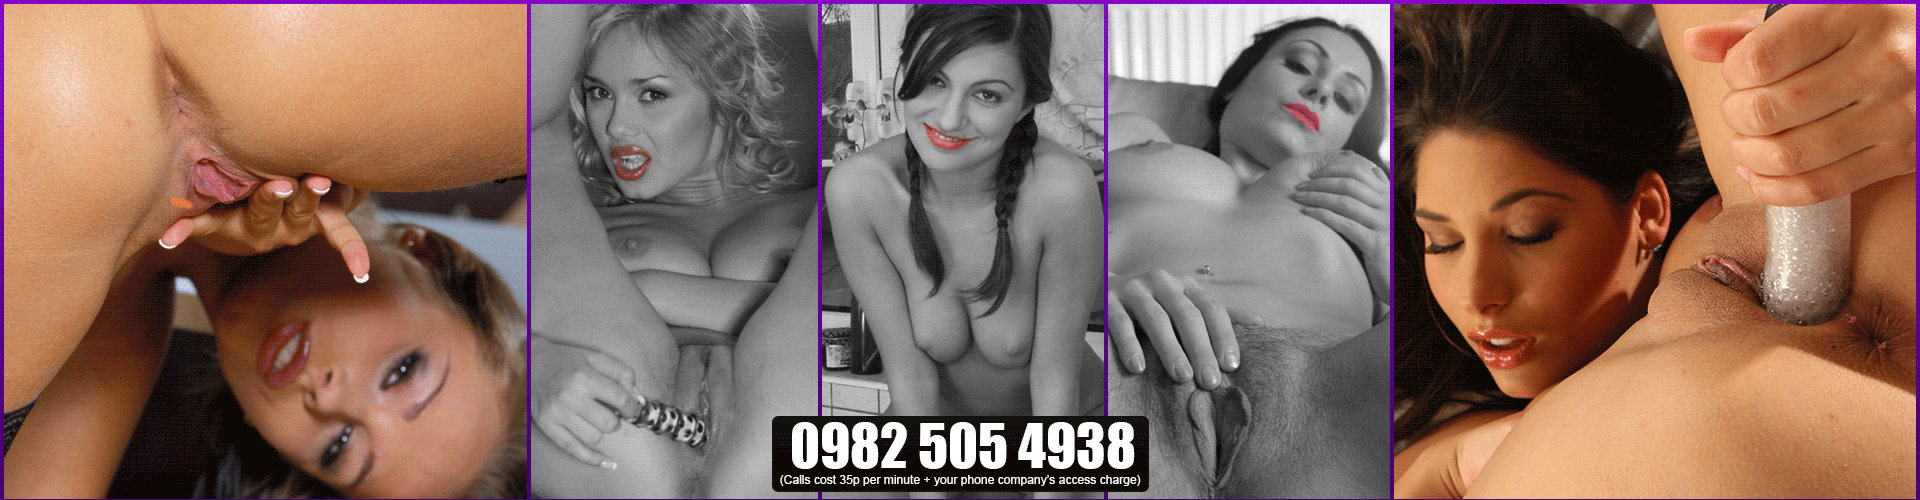 cheaptest uk phone sex chat